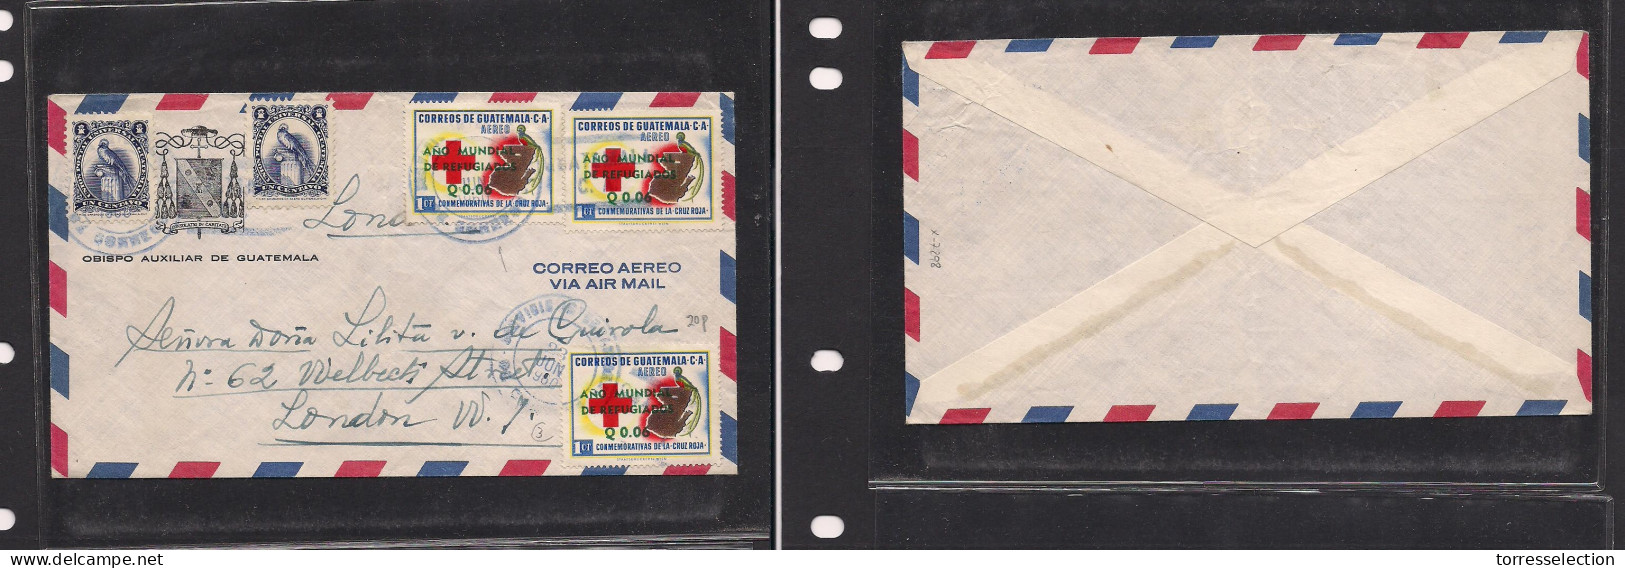 GUATEMALA. Guatemala Cover 1960 GPO To London Uk Air Mult Fkd Env Red Cross Ovpted Issue. Easy Deal. XSALE. - Guatemala